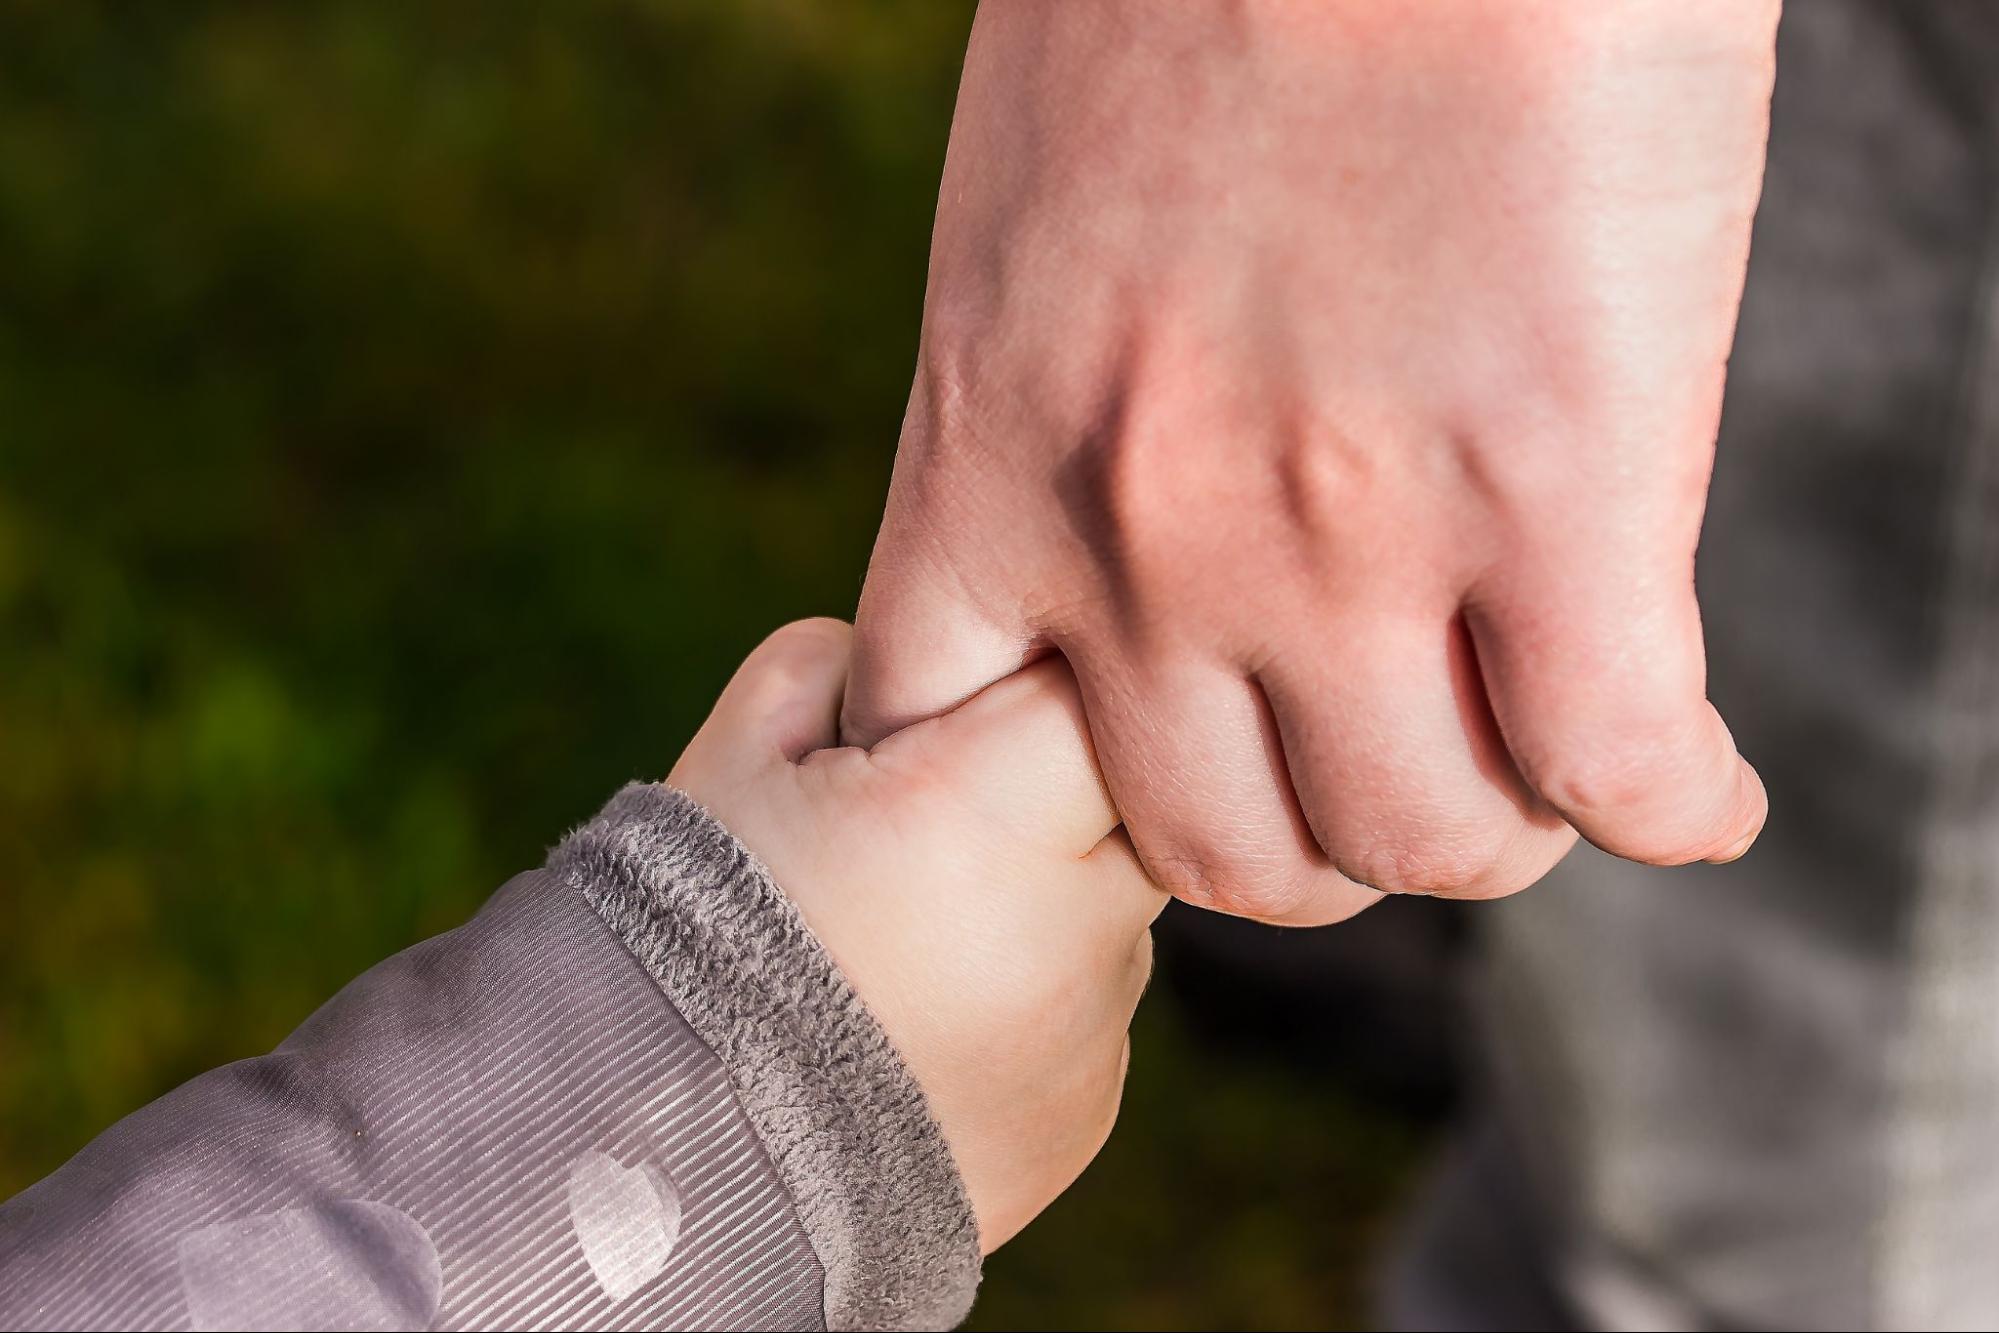 This is an image of a child and parent holding hands.